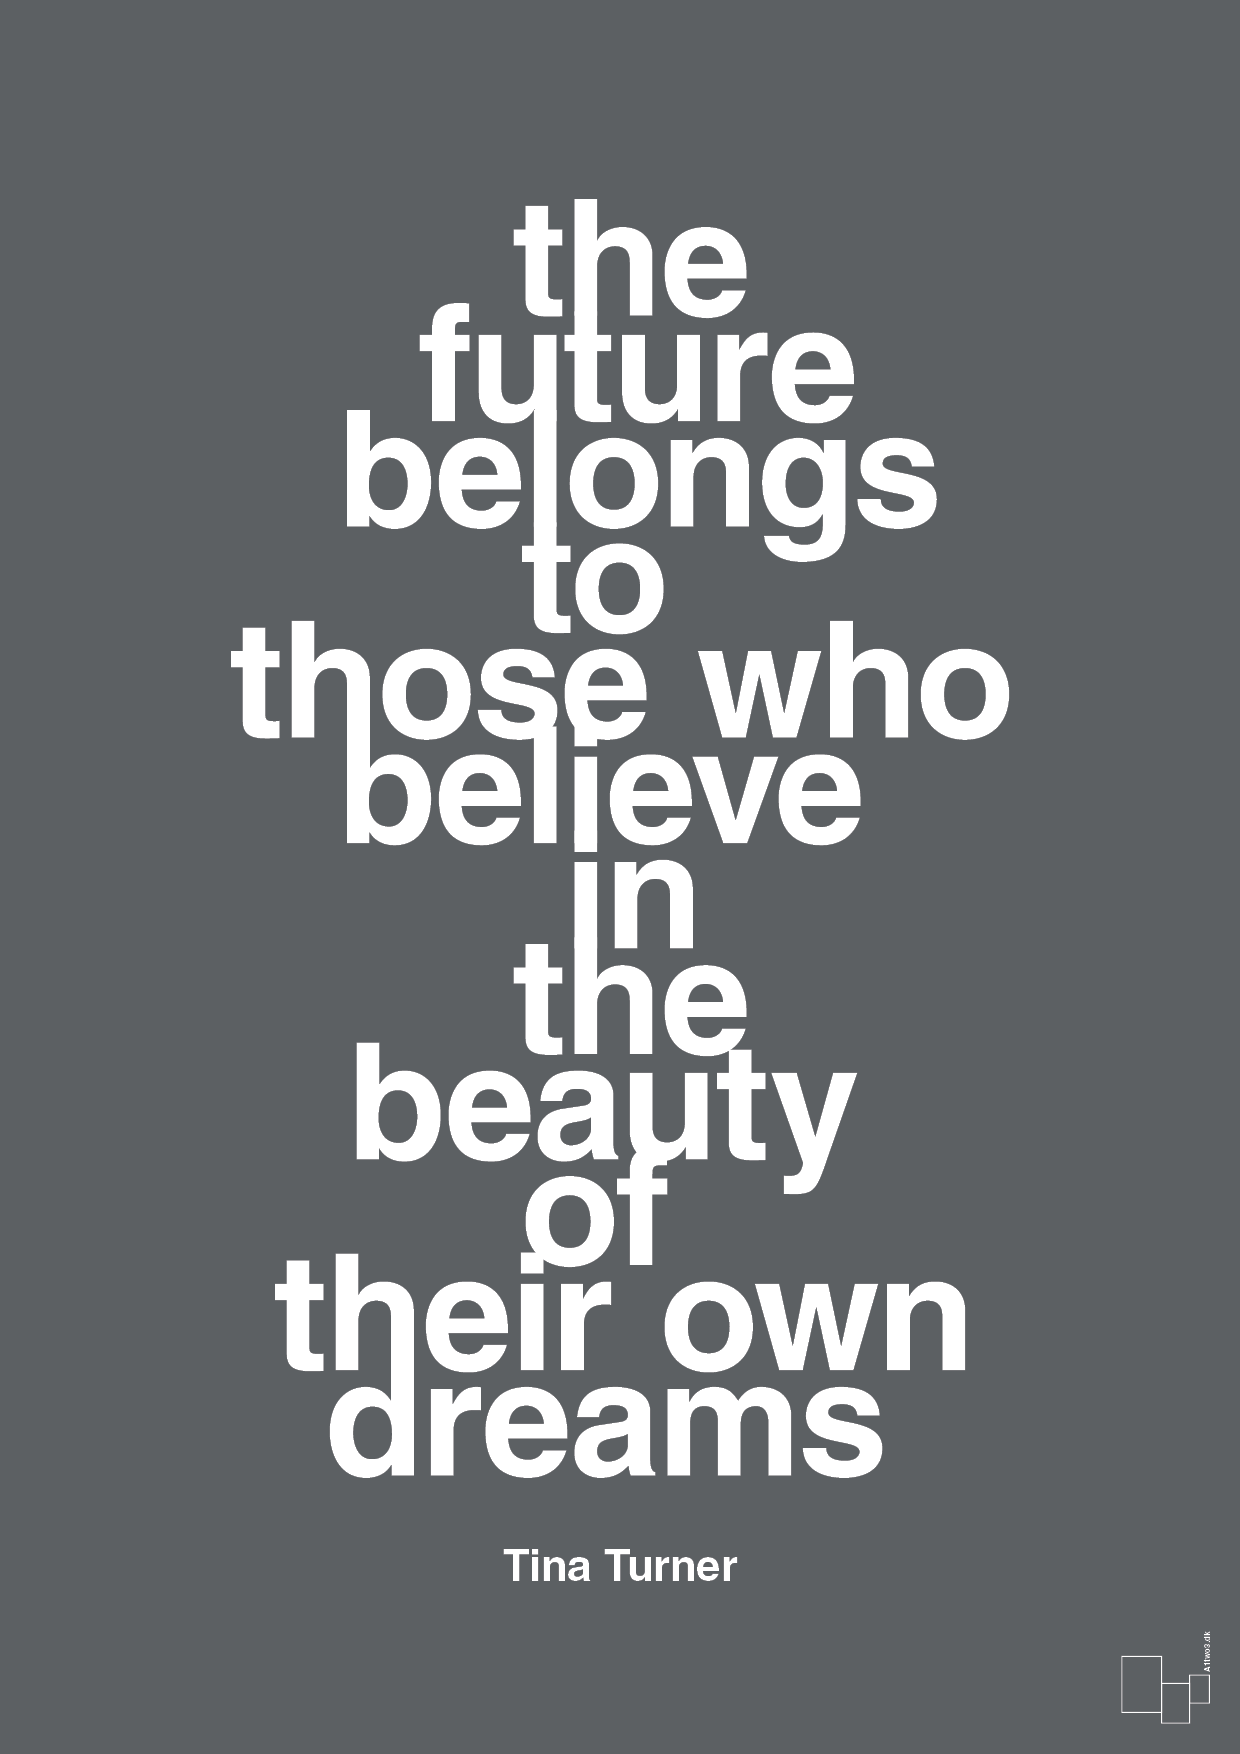 the future belongs to those who believe in the beauty of their own dreams - Plakat med Citater i Graphic Charcoal